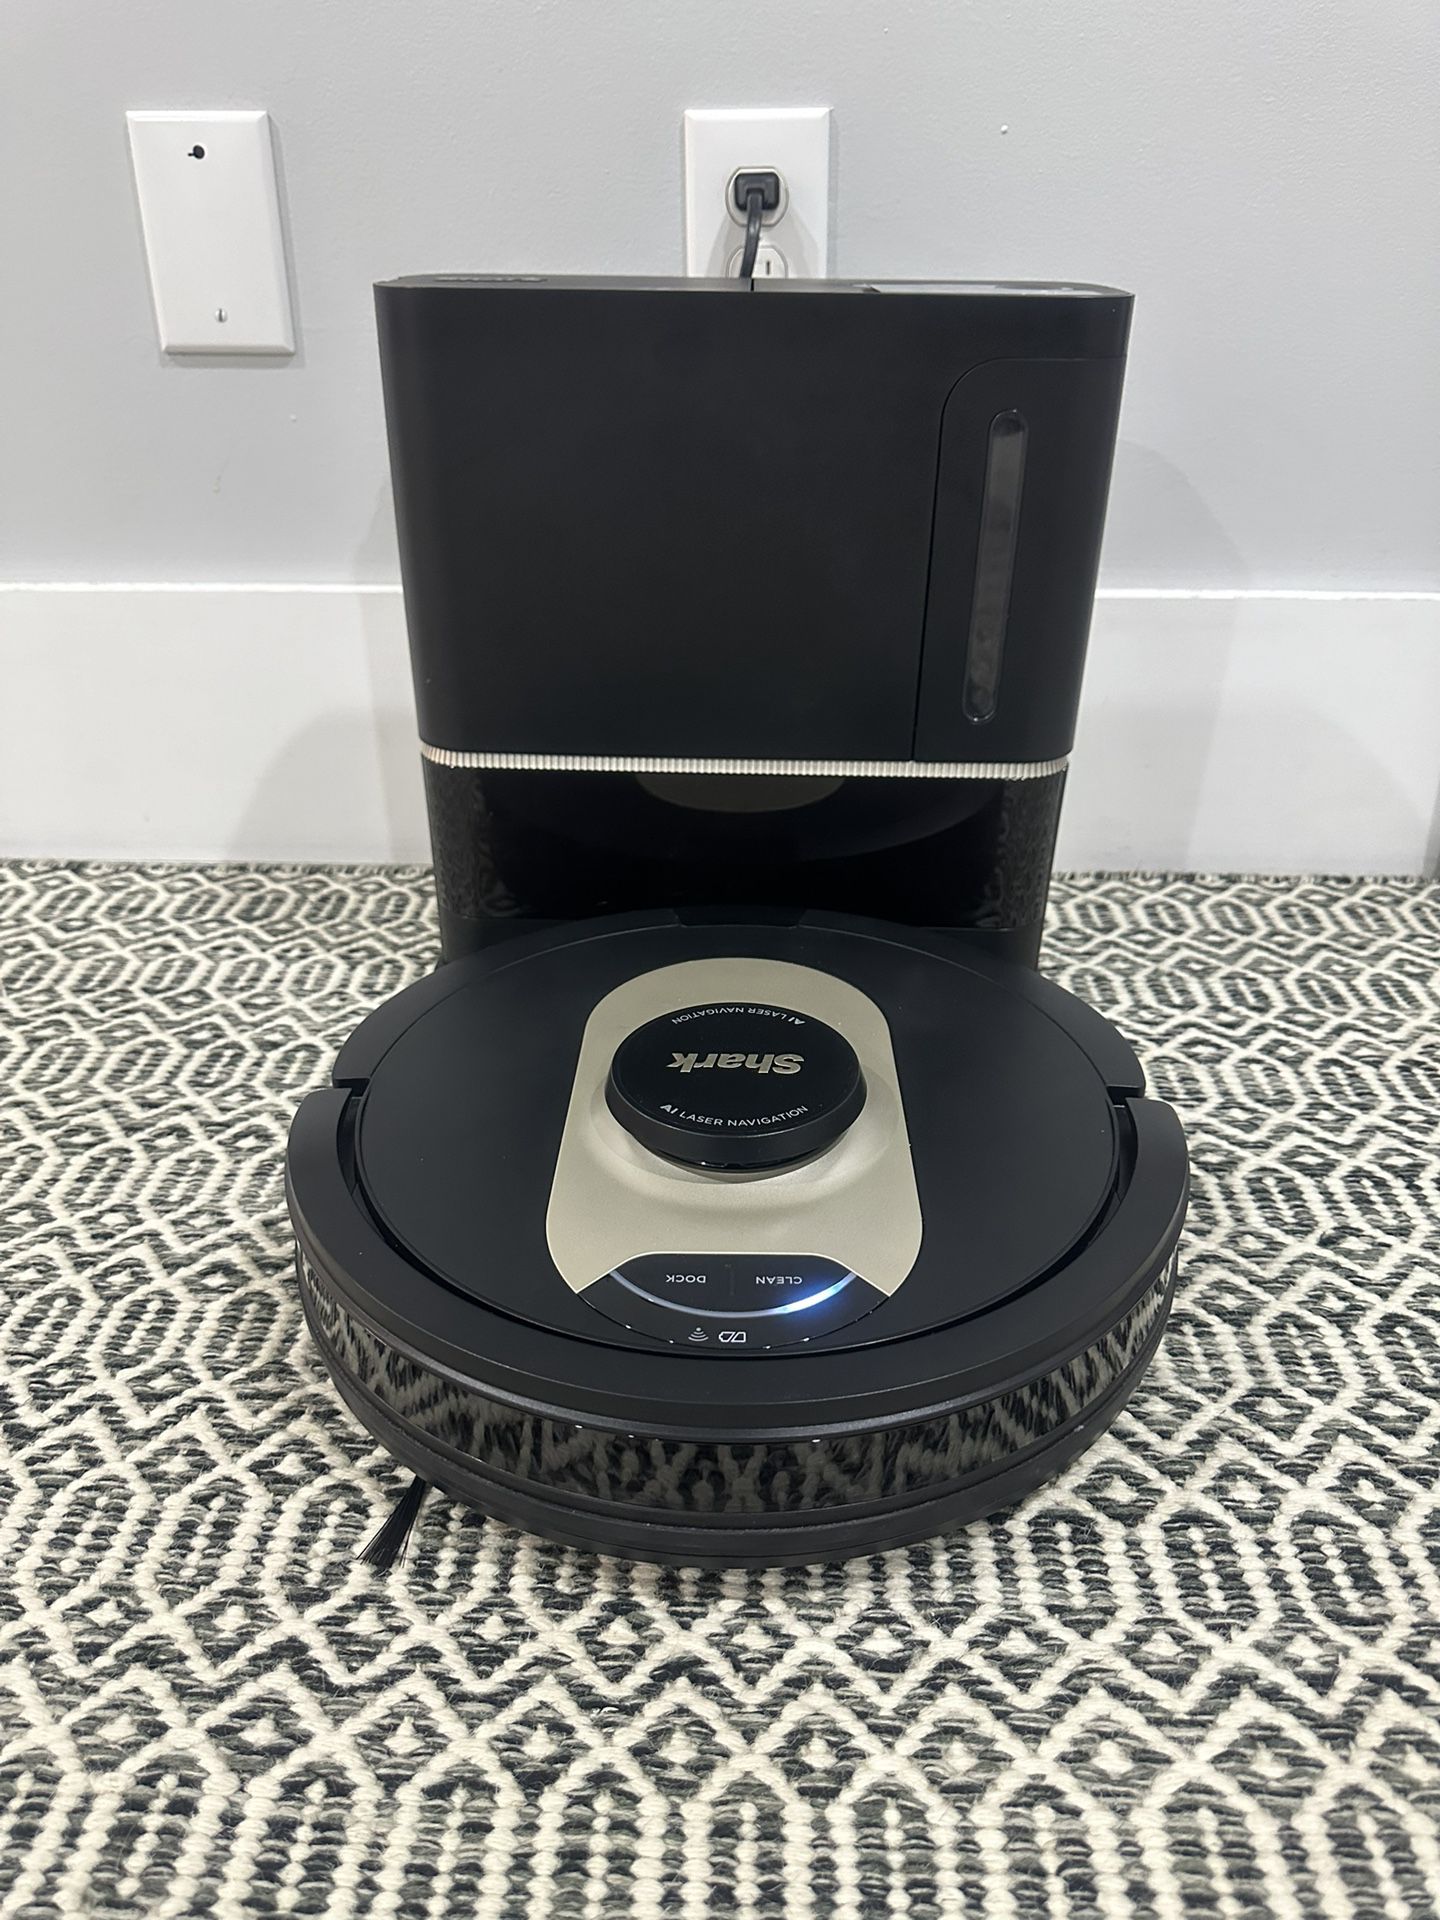 Shark Robot Vacuum, with Matrix Clean, Home Mapping, 30-Day Capacity HEPA Bagless Self Empty Base, Perfect for Pet Hair, Wifi MODEL: AV2510AOUS Very c